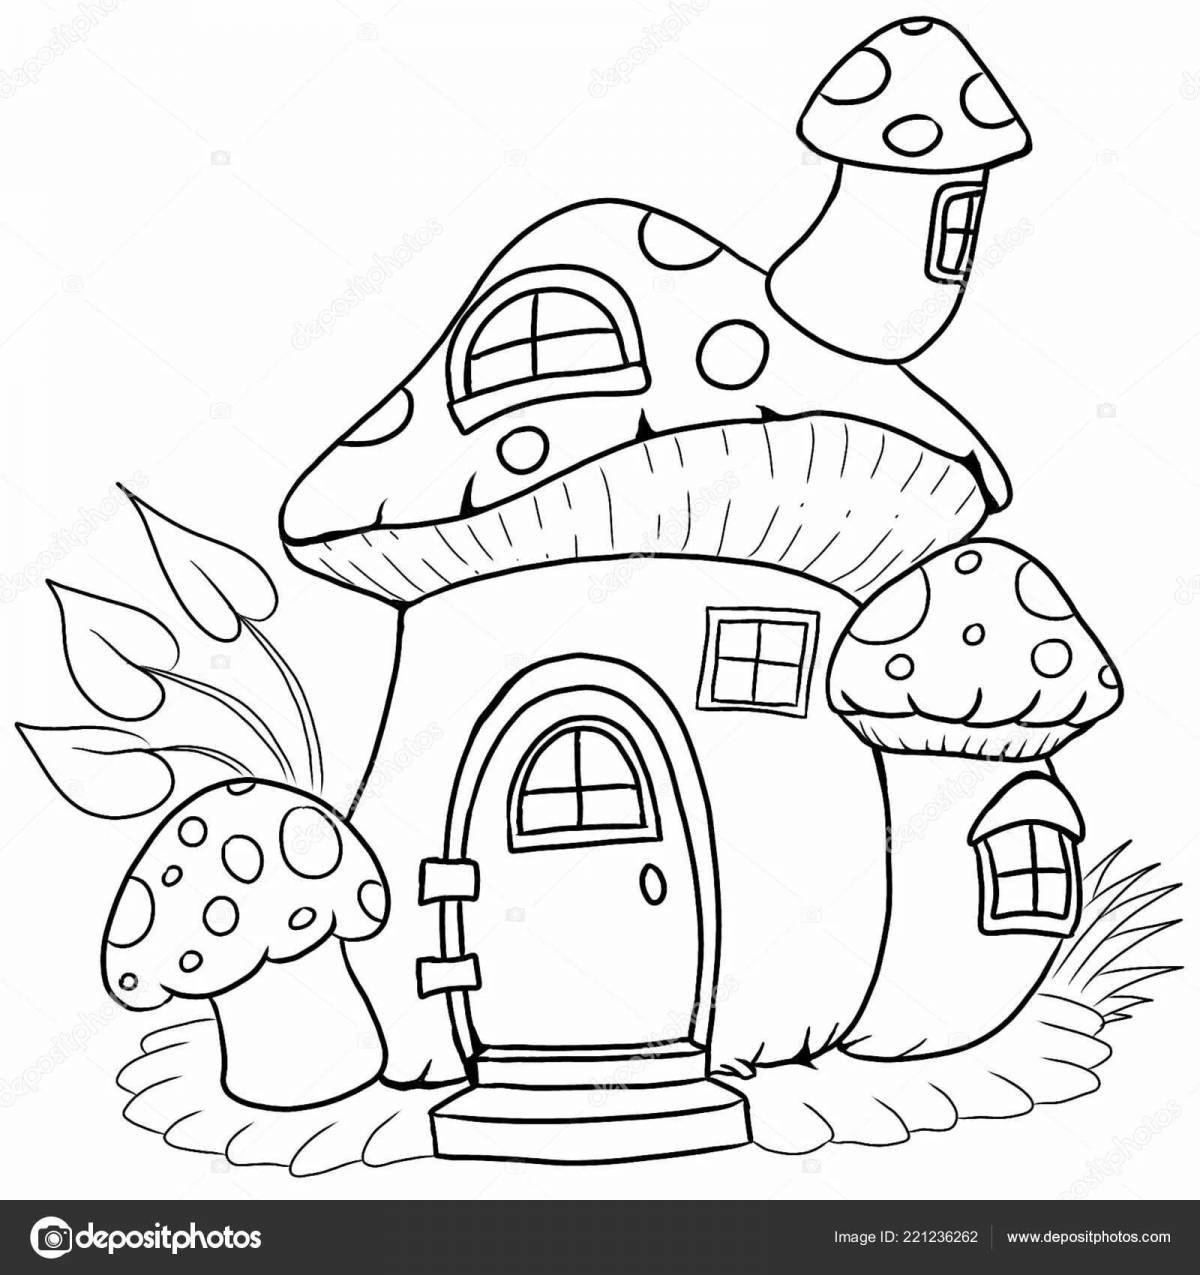 Adorable children's world coloring house